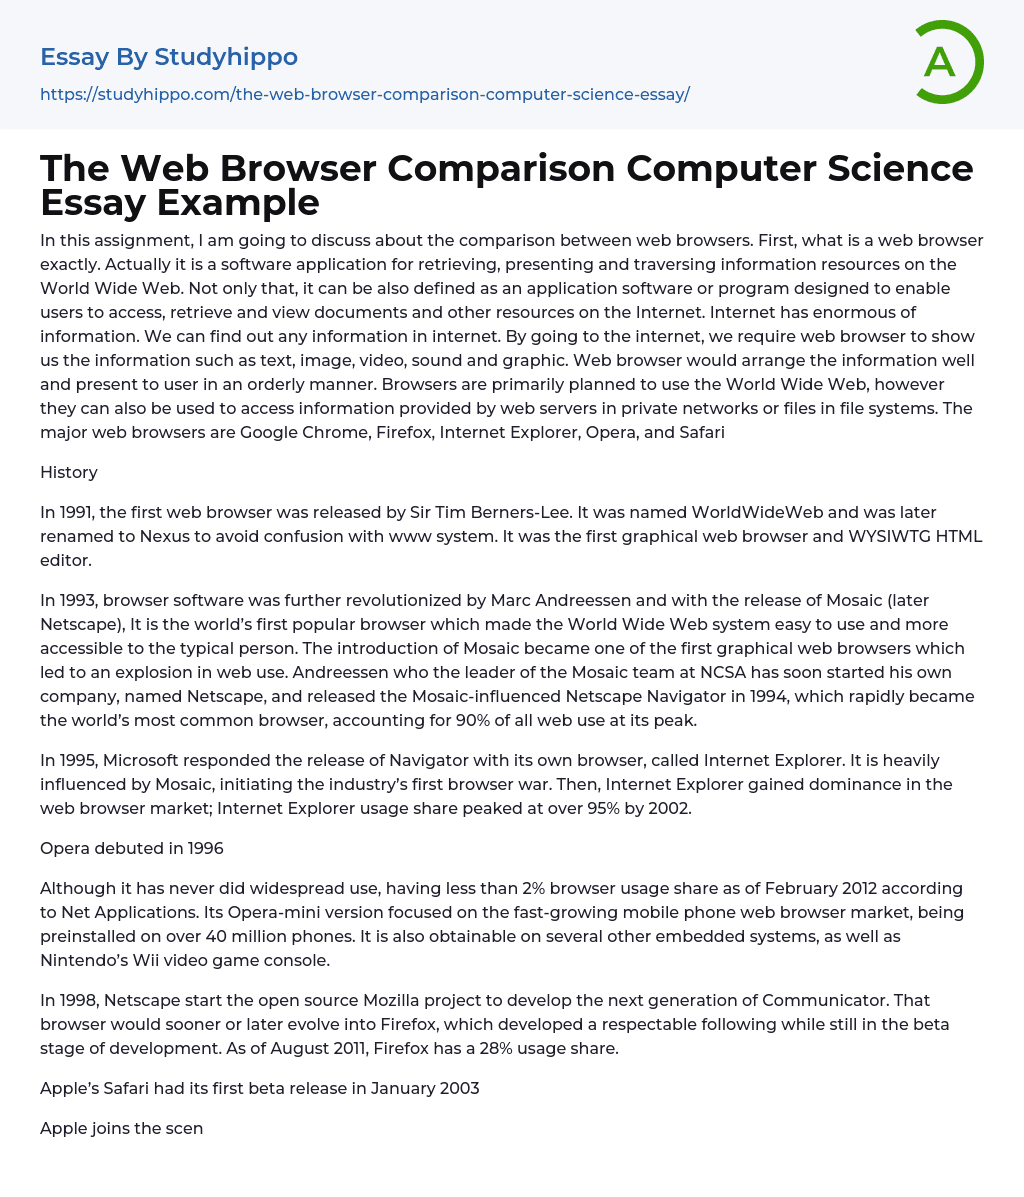 The Web Browser Comparison Computer Science Essay Example